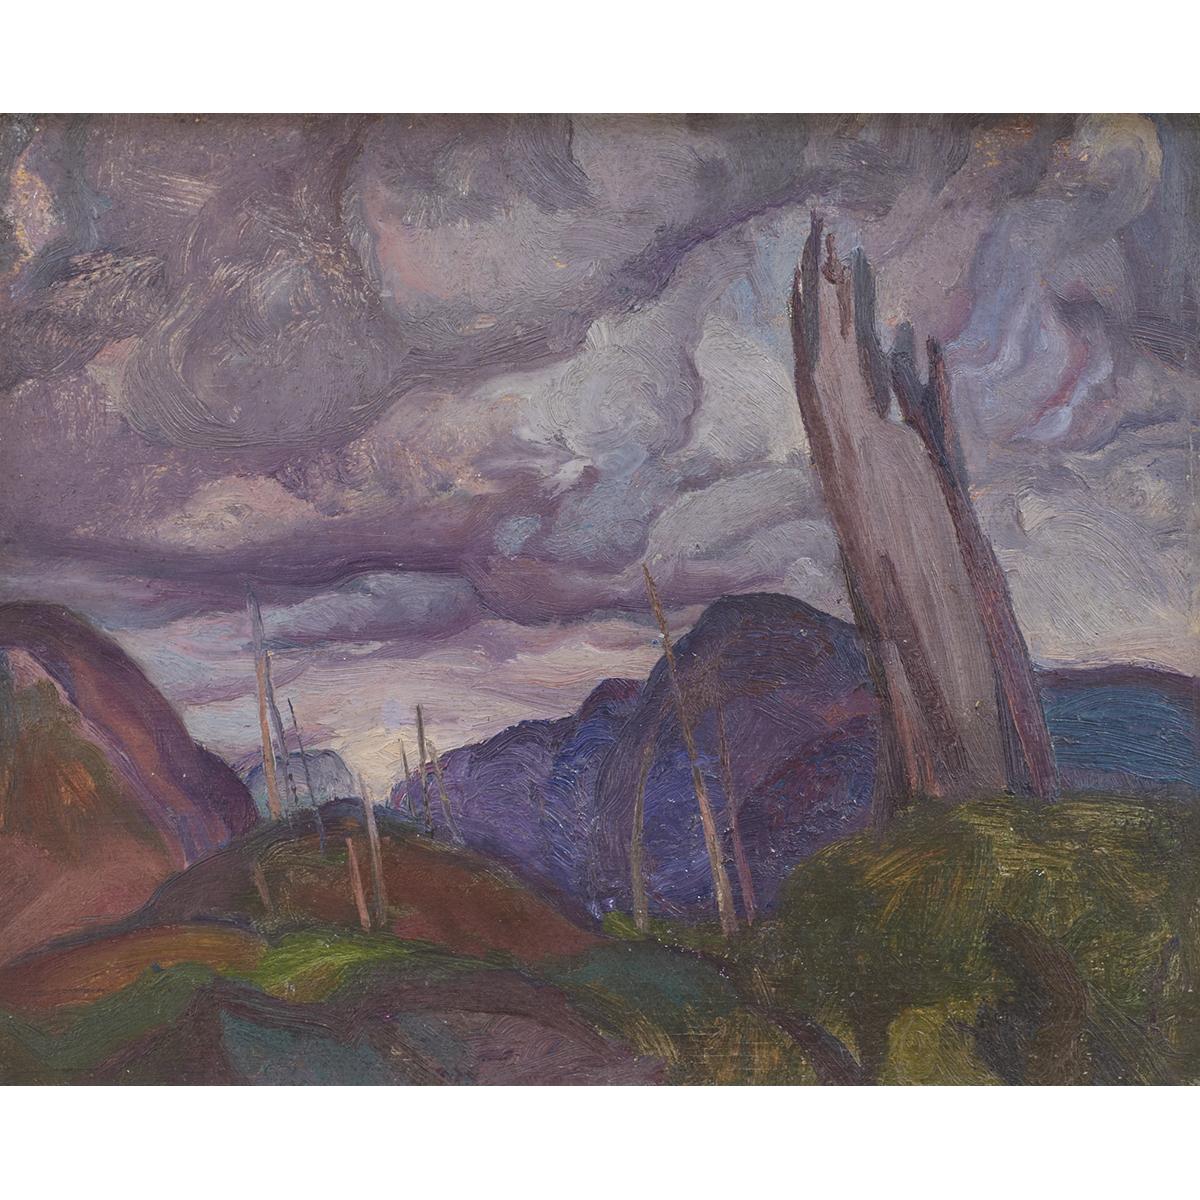 ATTRIBUTED TO FREDERICK HORSMAN VARLEY, A.R.C.A.